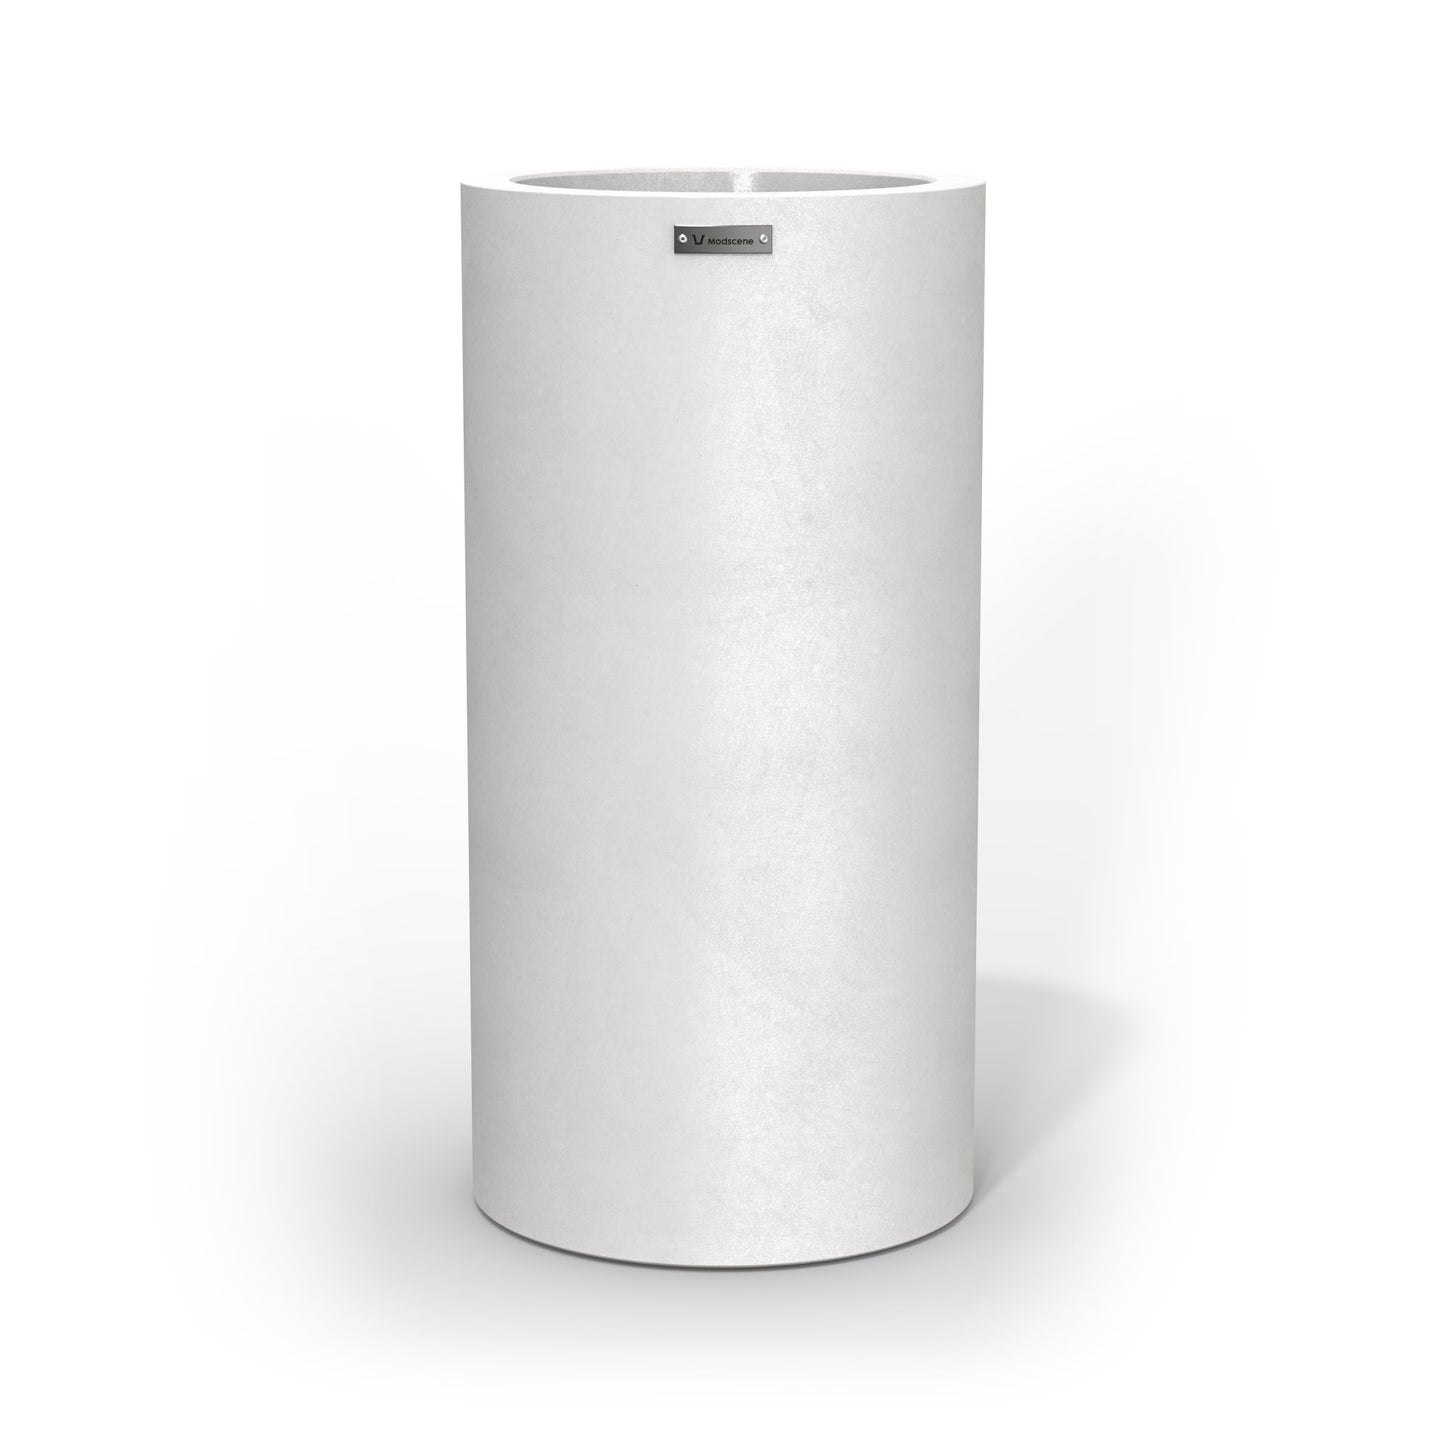 A tall cigar cylinder planter pot in a matte white colour made by Modscene.